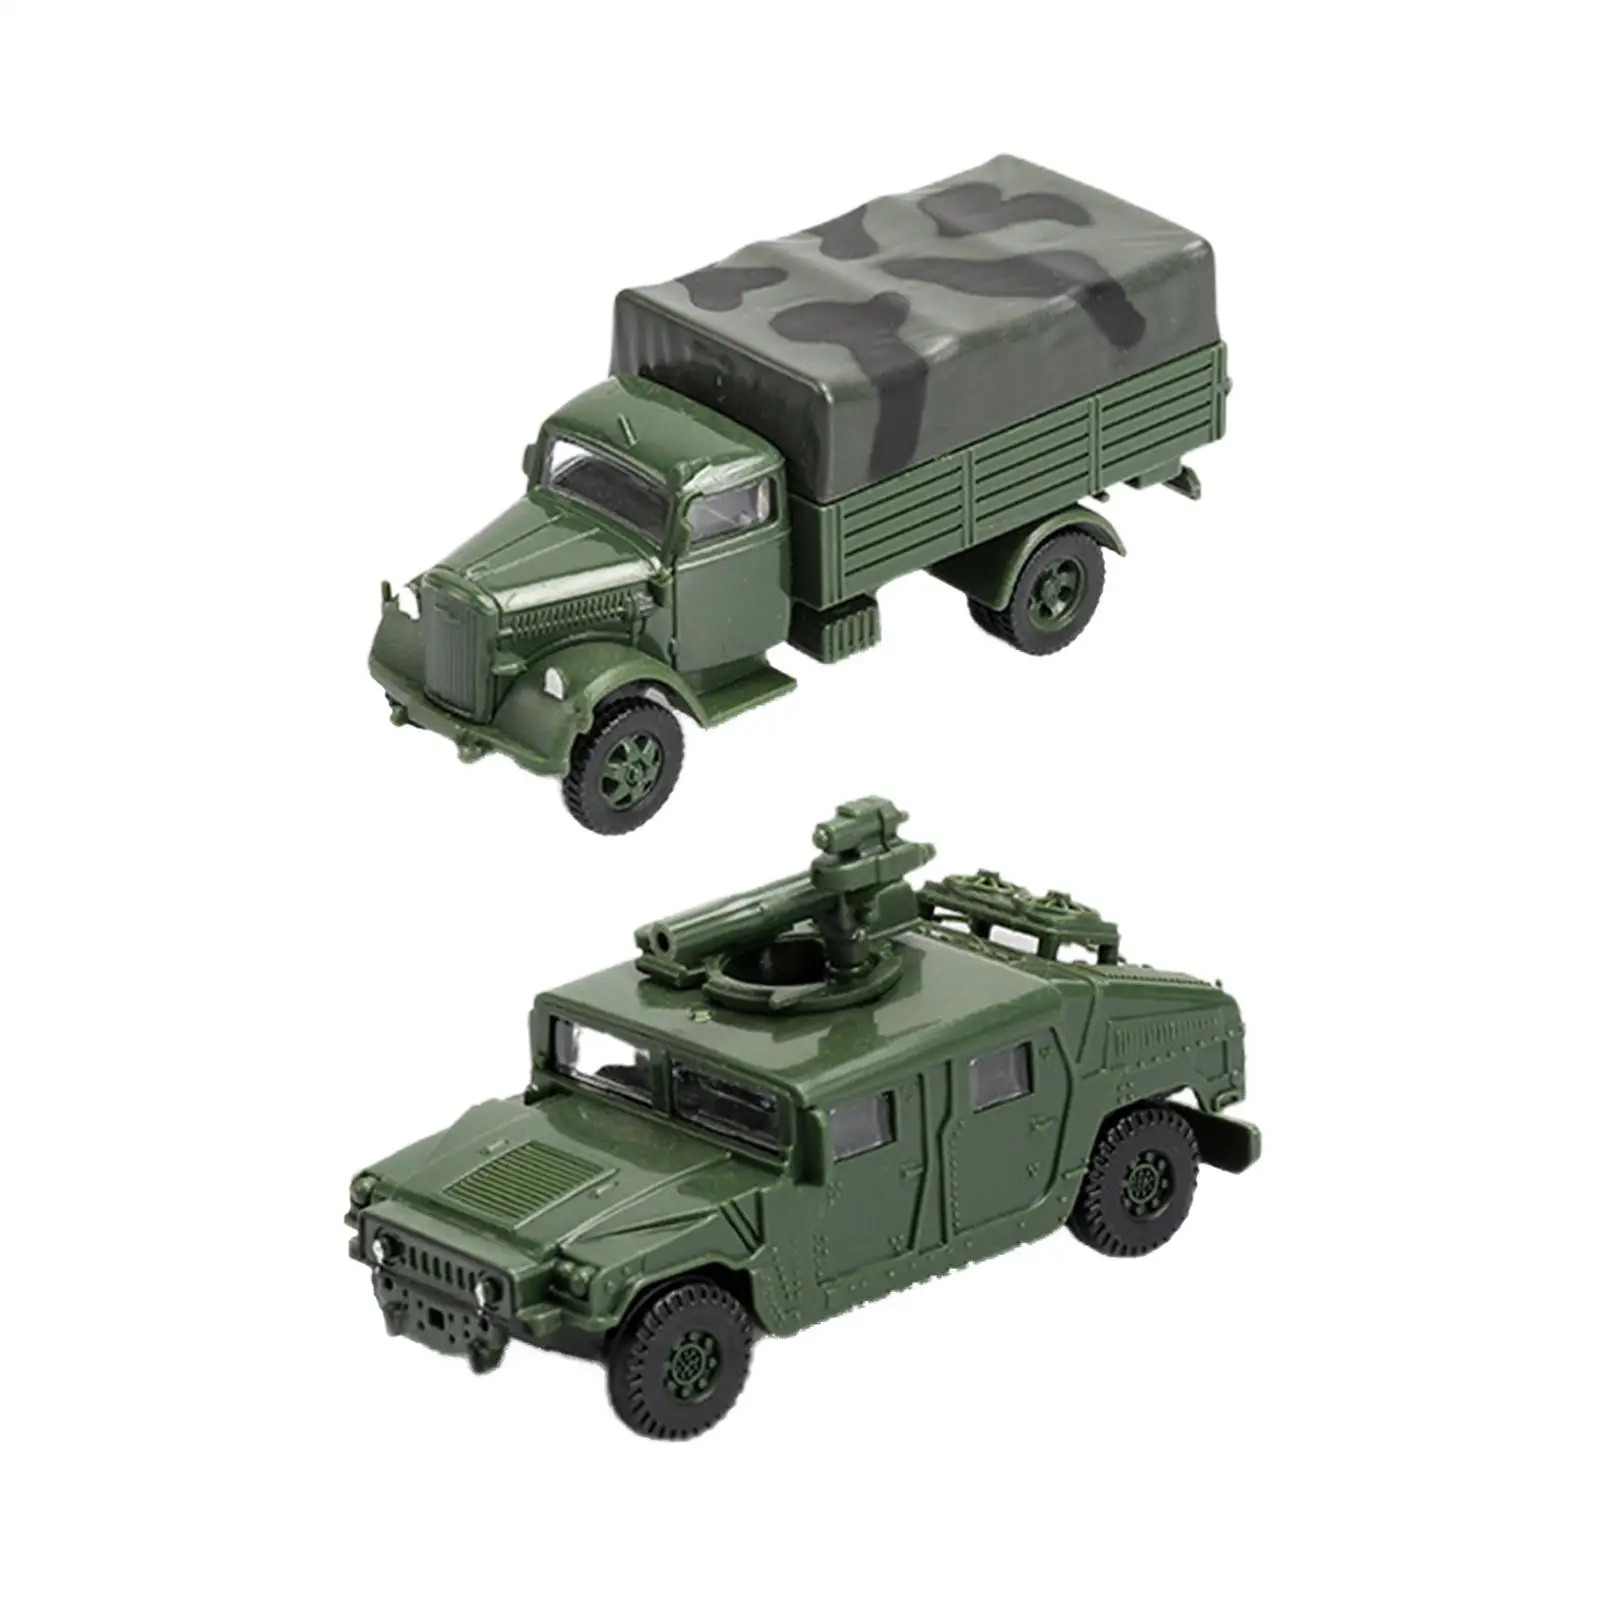 2x 4D 1:72 Assemble American Humvee Kits Army Vehicle for Christmas Present